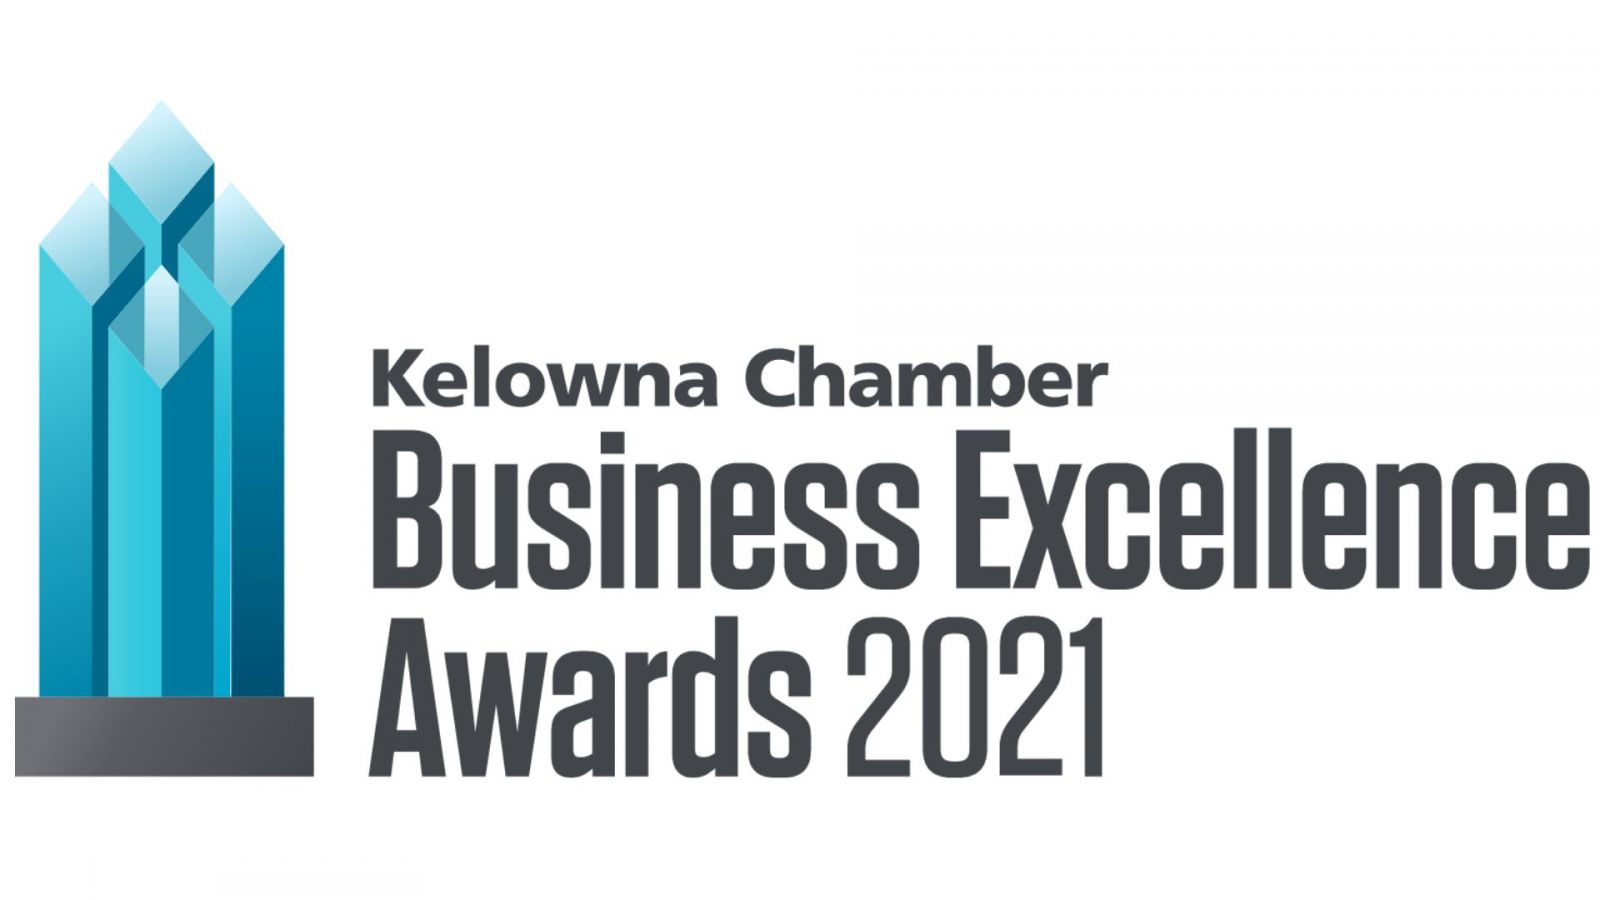 business excellence awards kelowna